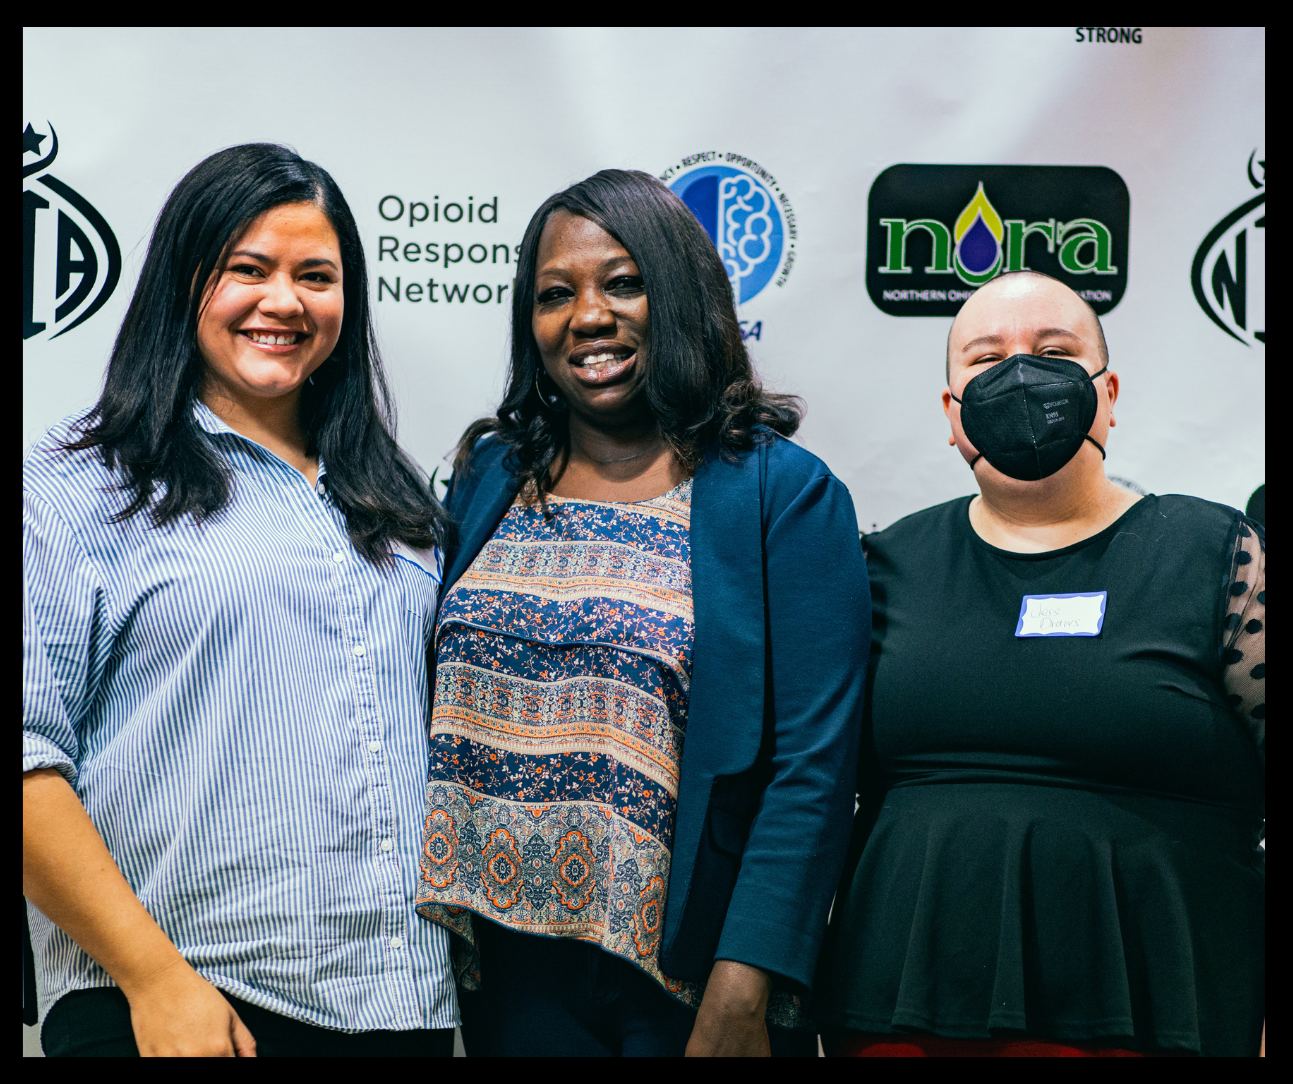 The hosts for the Business of Recovery Seminar Summit in Cleveland, from left to right: Isa Velez Echevarria of the GLATTC, Anita Bradley of NORA, and Jess Draws of ORN.